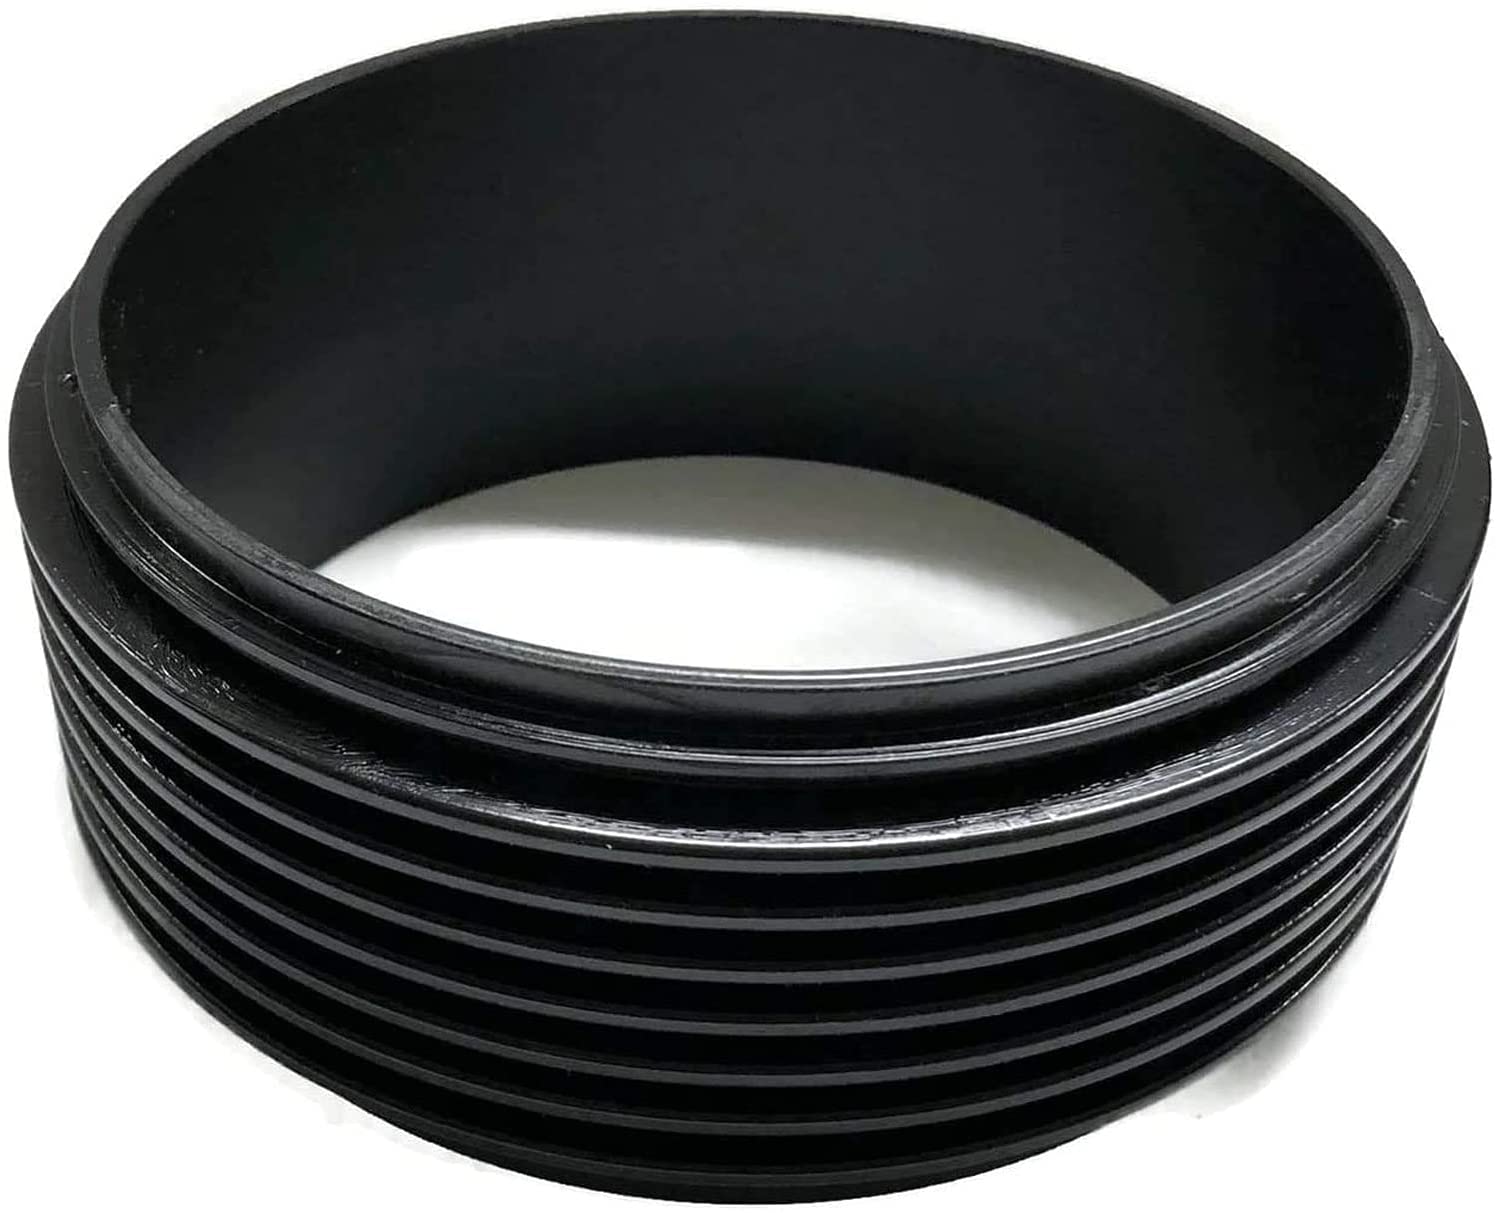 Sea-Doo New OEM, SPARK High Performance Wear Ring, 267000925 - The Parts Lodge